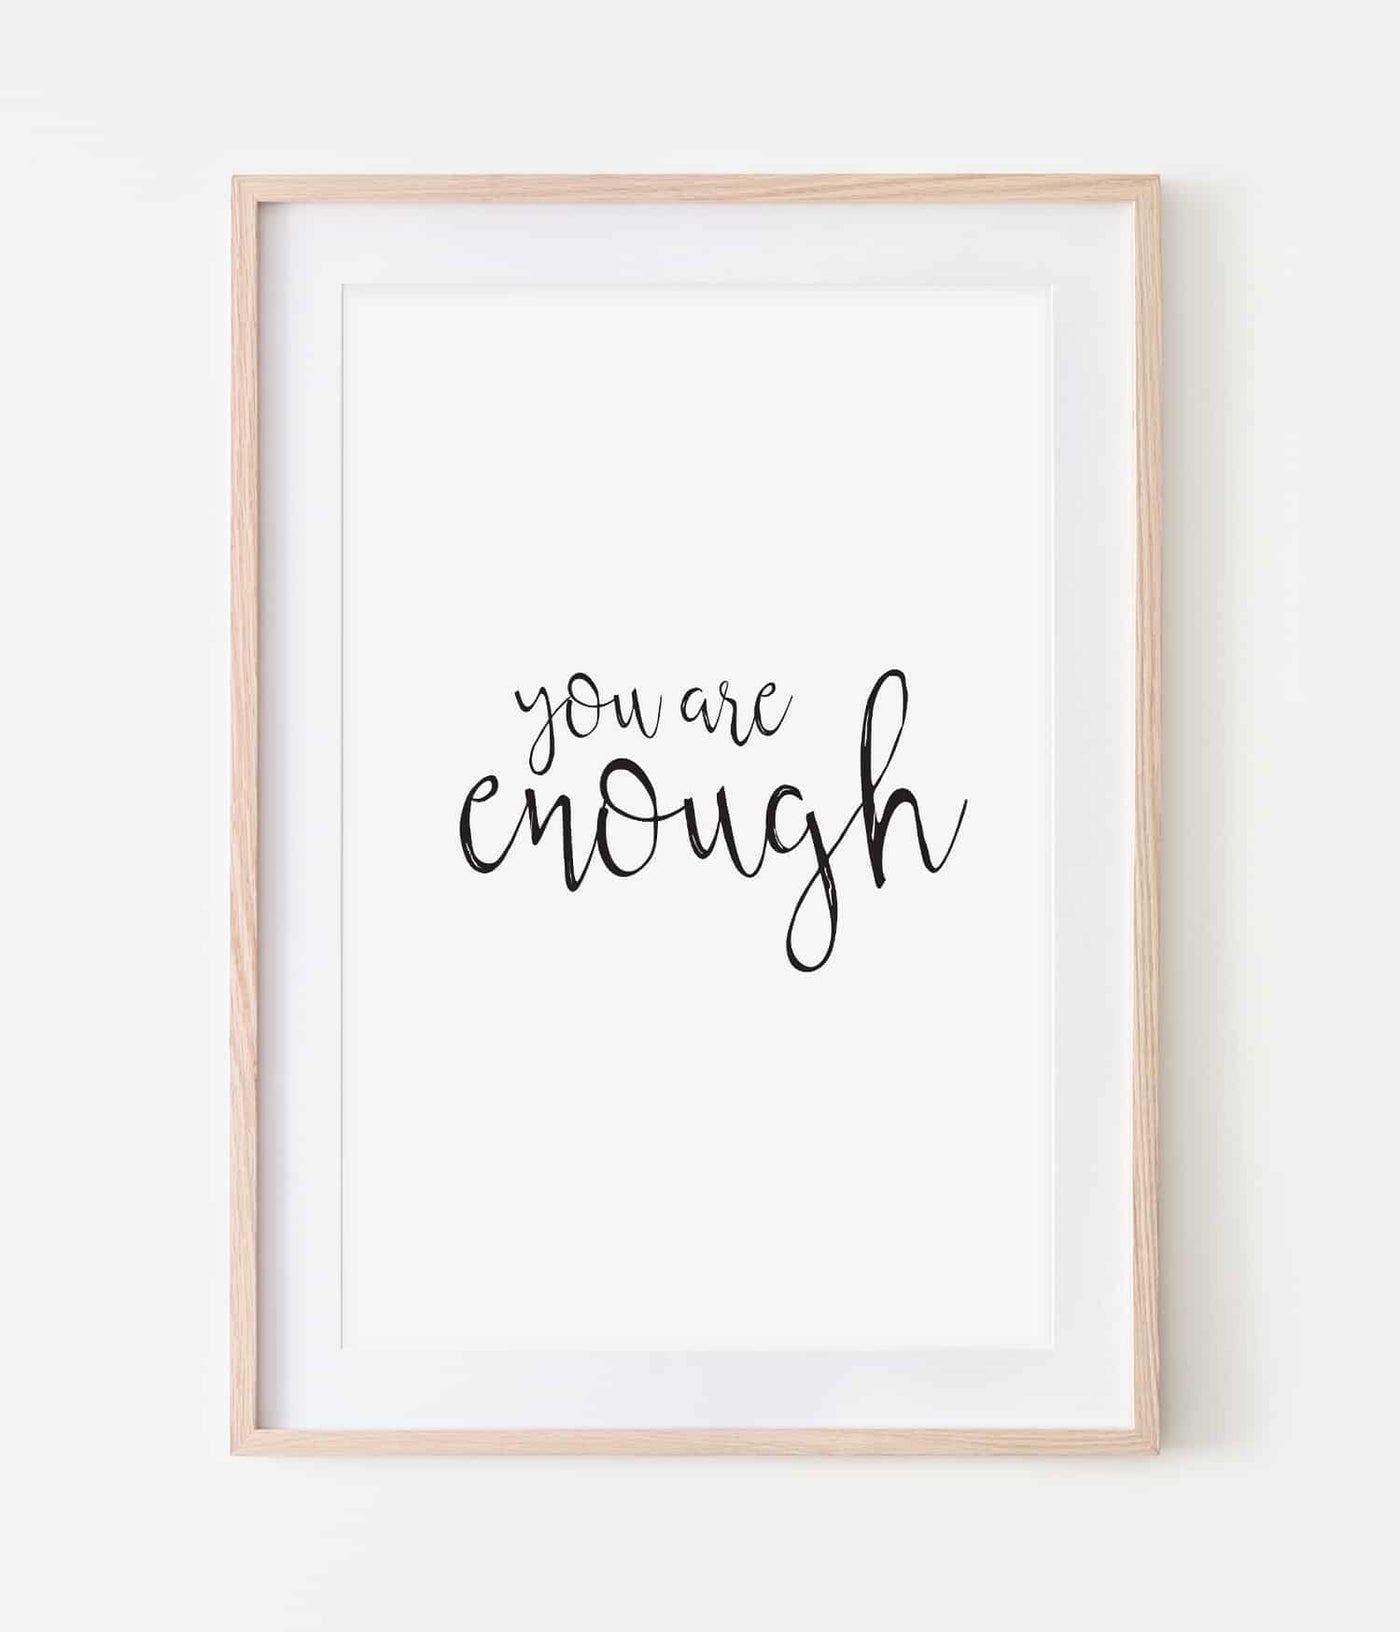 'You are enough' Print